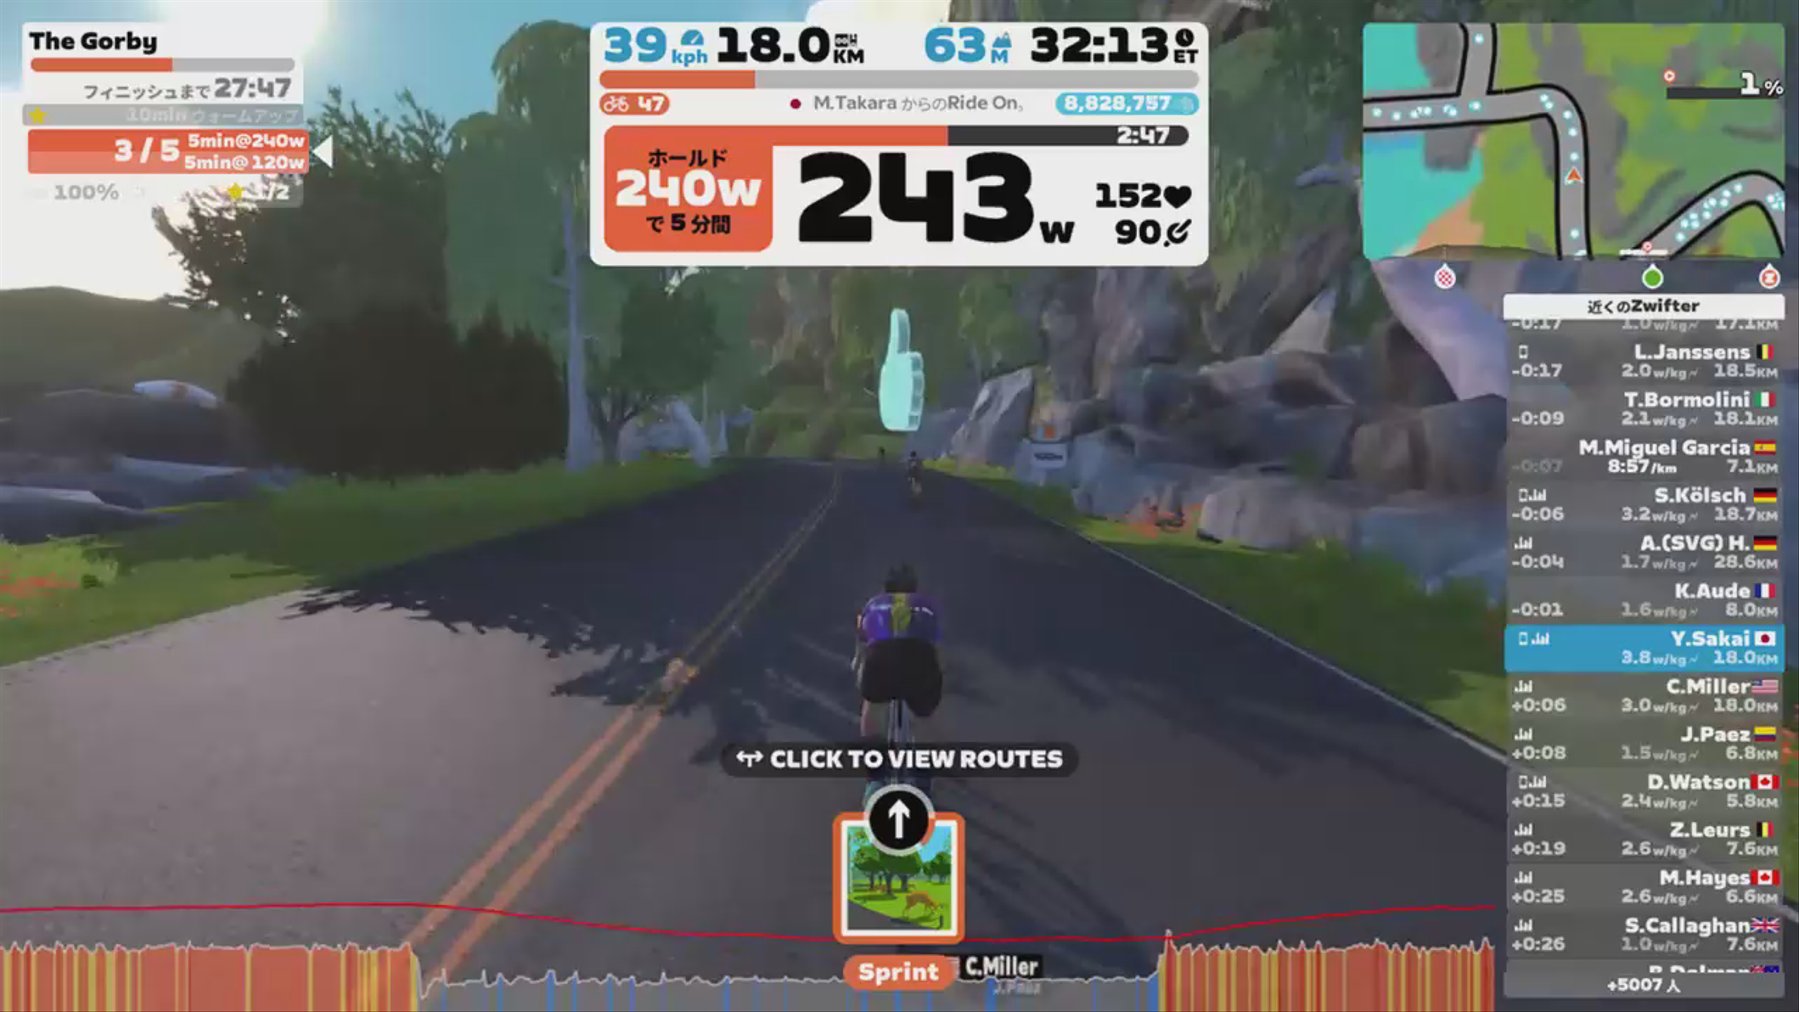 Zwift - The Gorby in Watopia